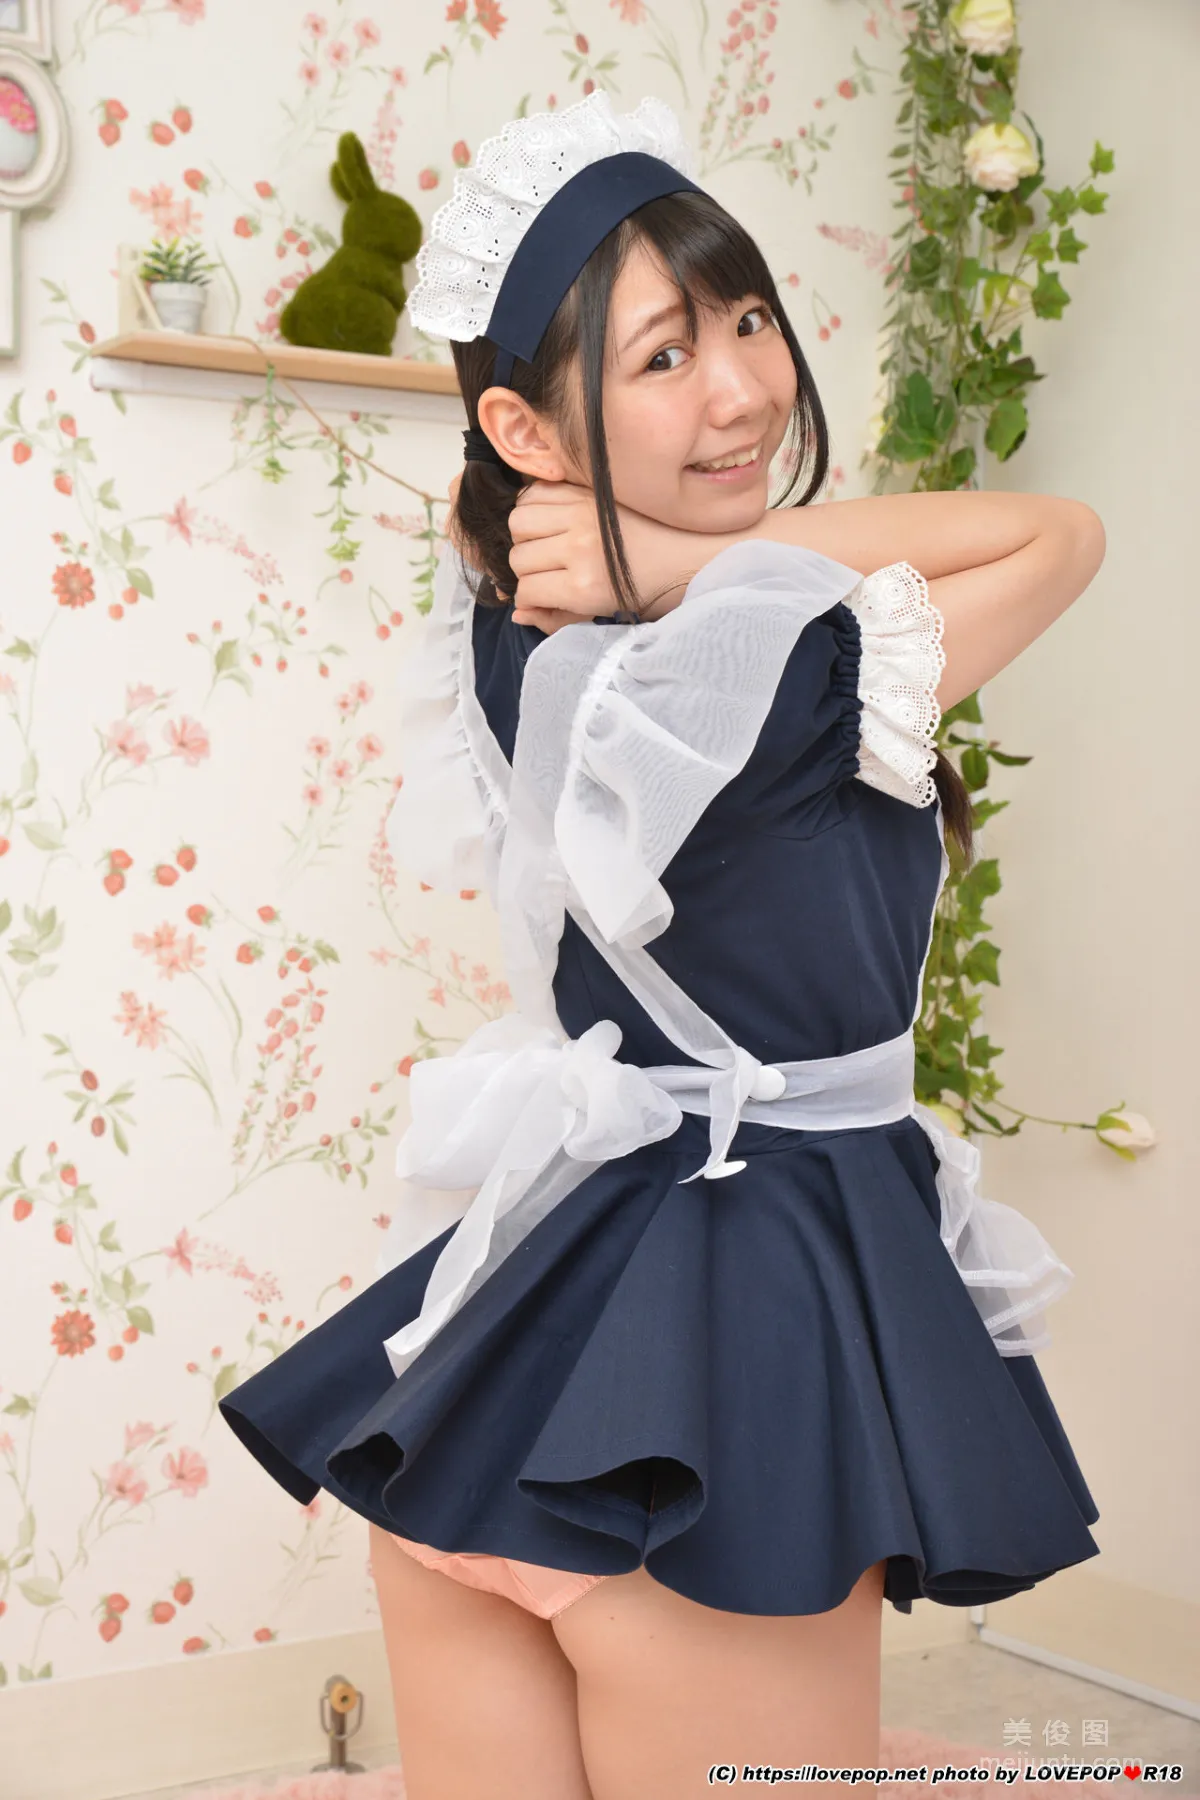 [LOVEPOP] Special Maid Collection - 白井ゆずか Photoset 0133